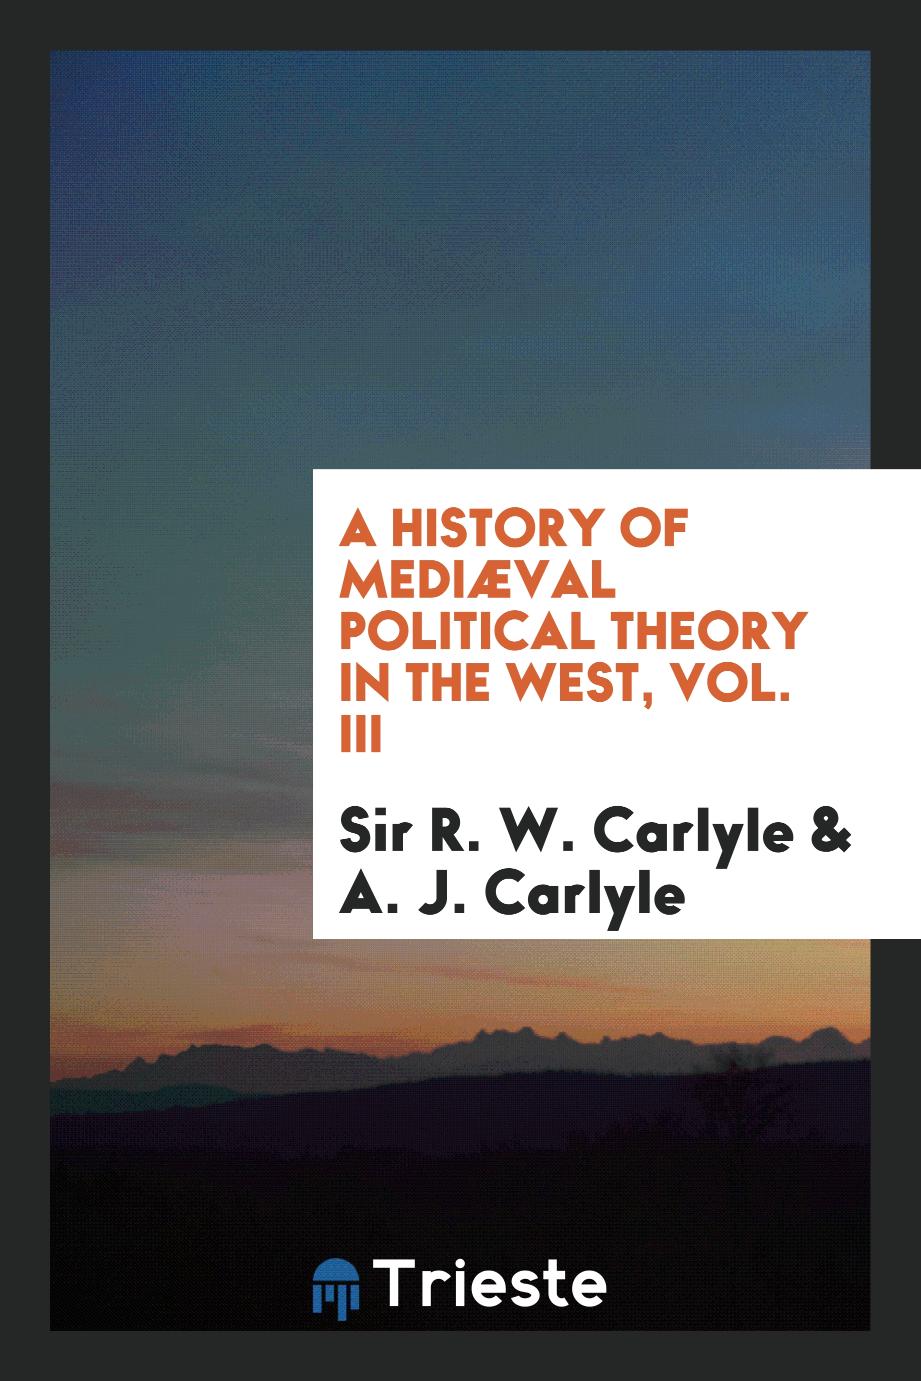 A history of mediæval political theory in the West, Vol. III